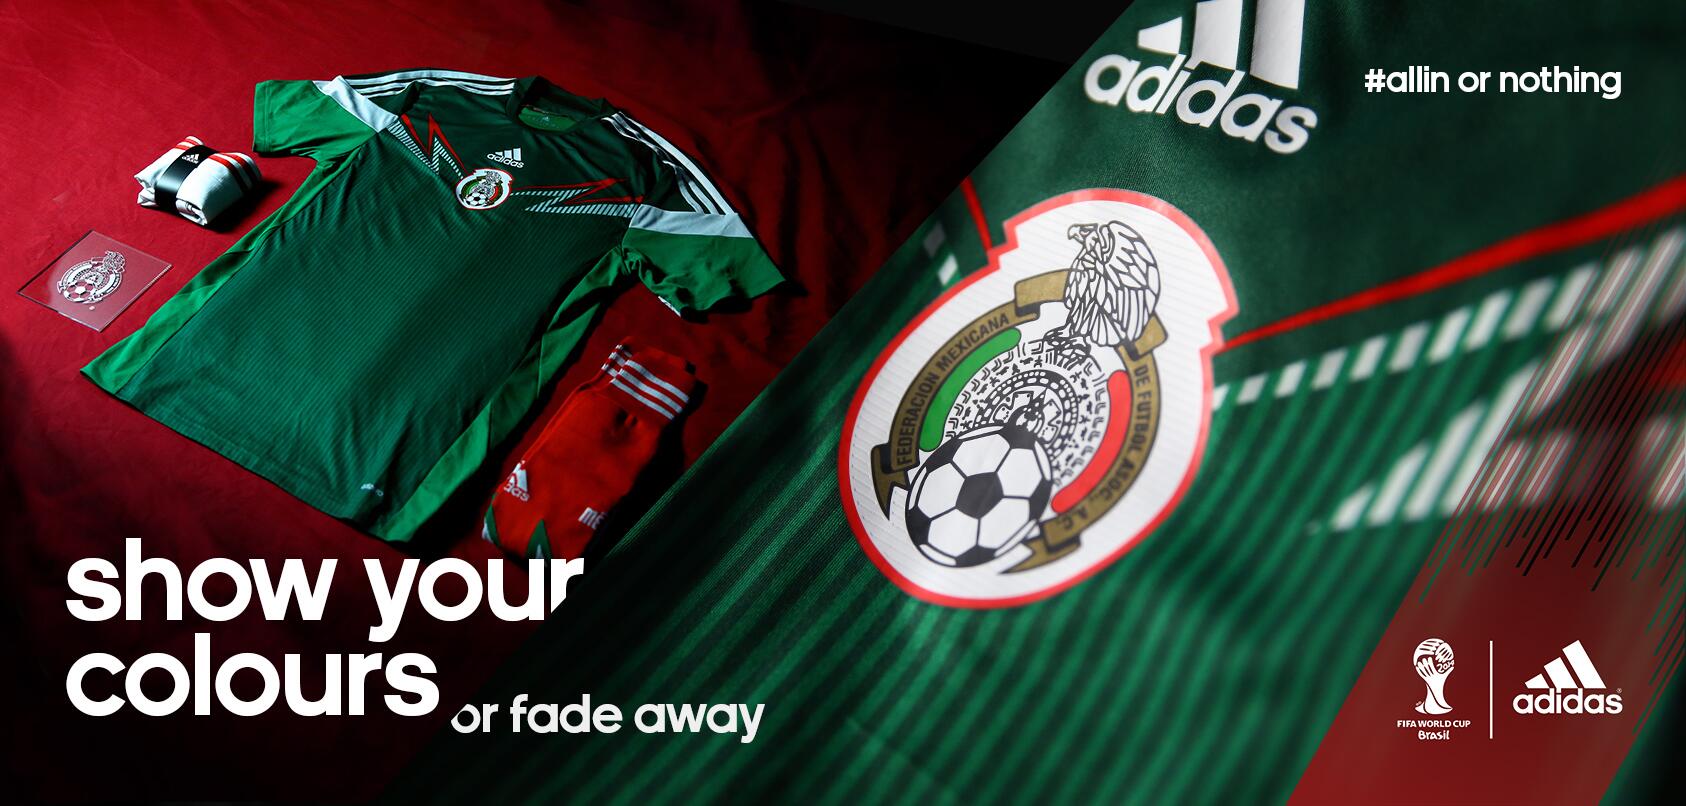 Adidas Mexico Wallpapers